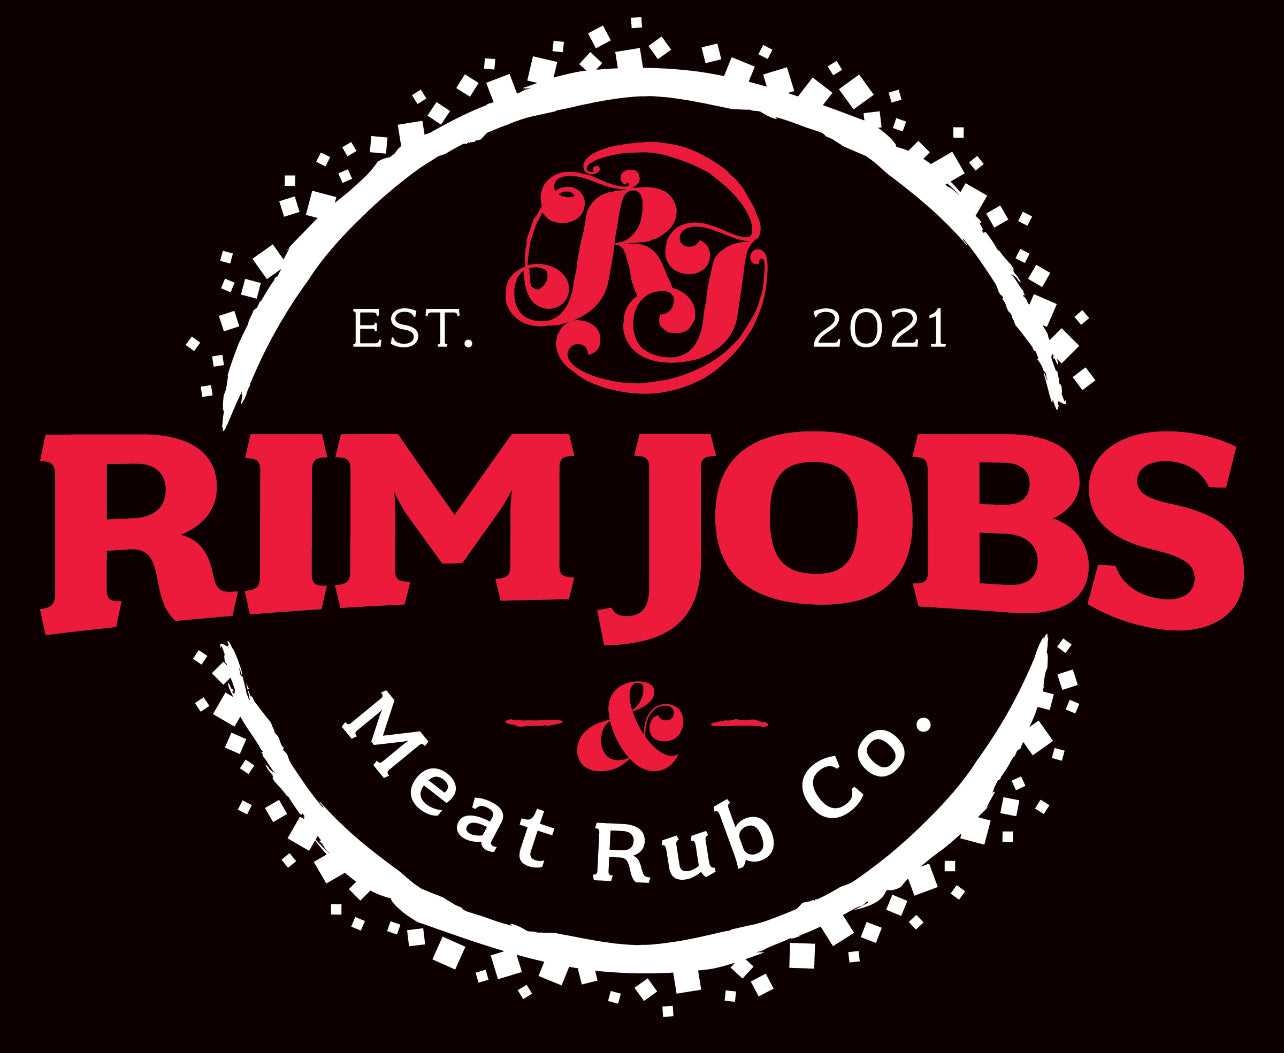 Rimjobs & Meat Rub Co. Gift Card